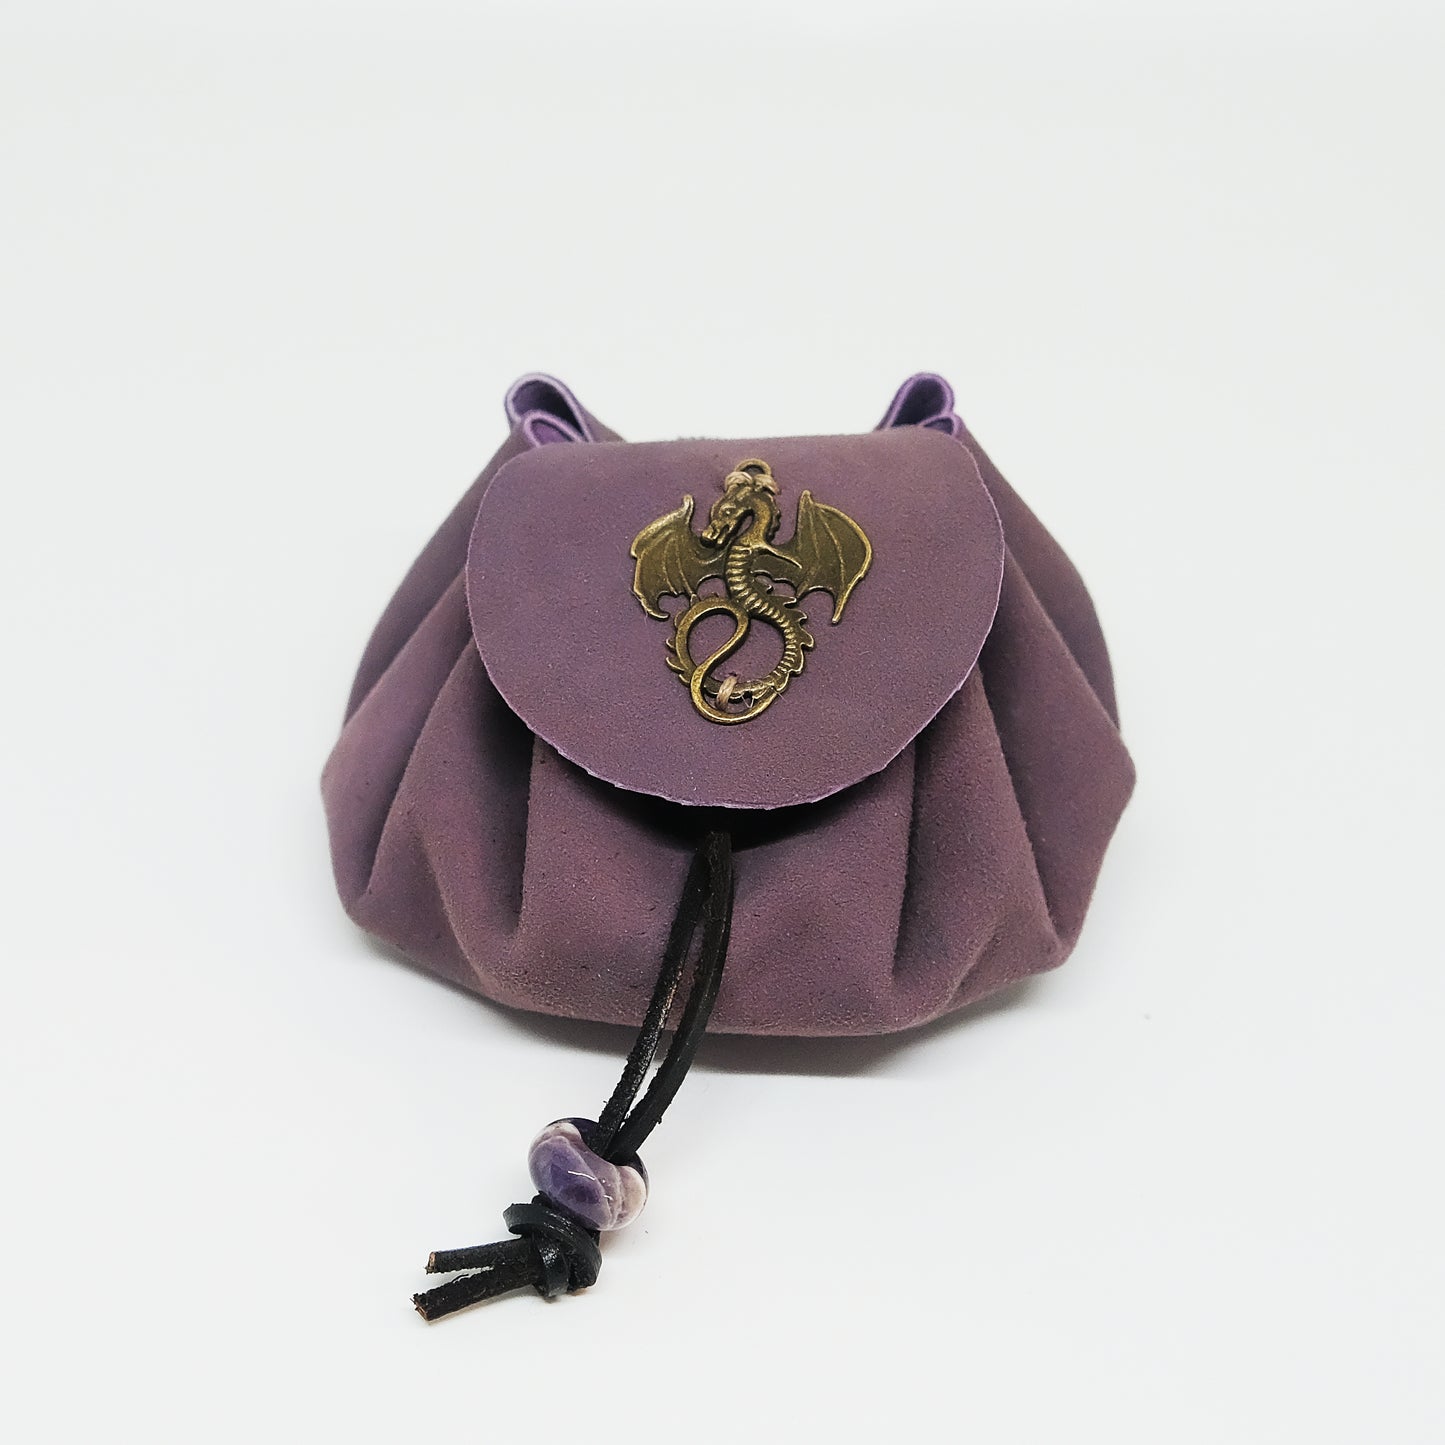 Handmade Purple Leather Metal Dragon Dice Bag Suitable For 3 Sets Of Dice Attached Amethyst Accessory. Game accessories for table-top game, board game and rpg game lover